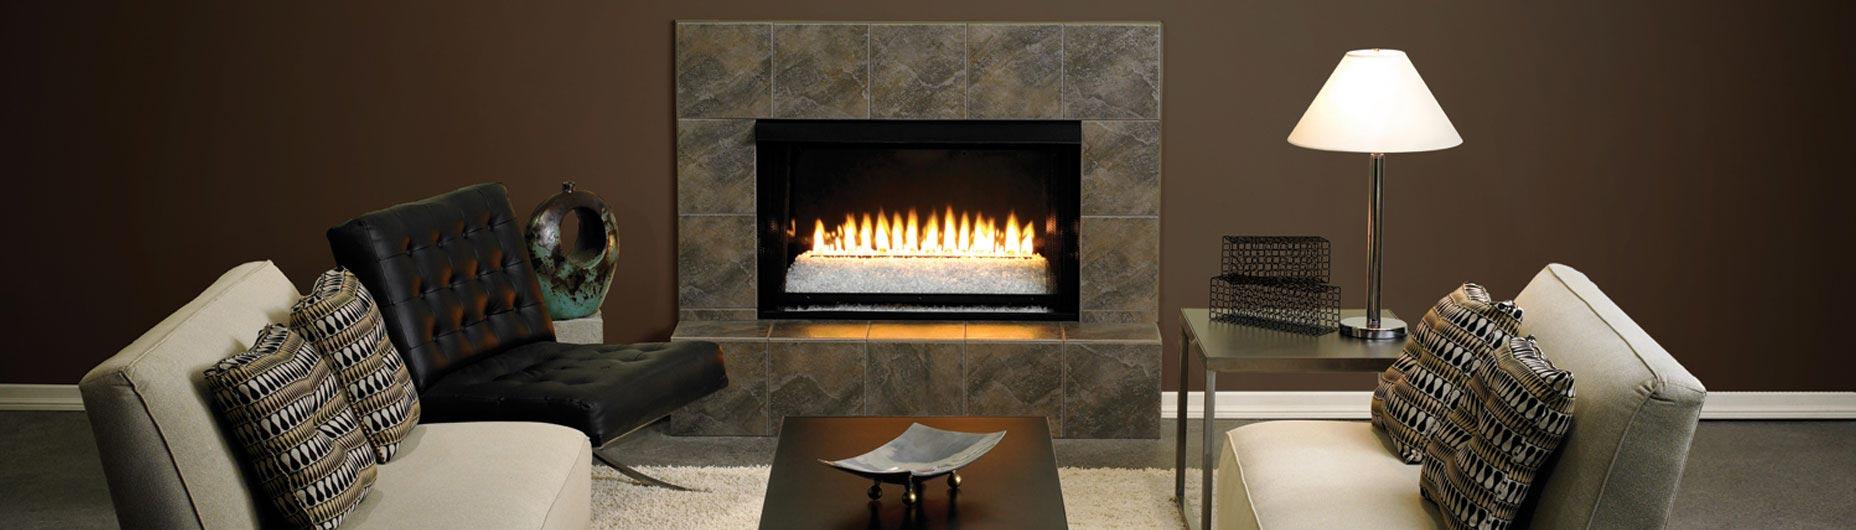 Professional fireplace installations in West Long Branch